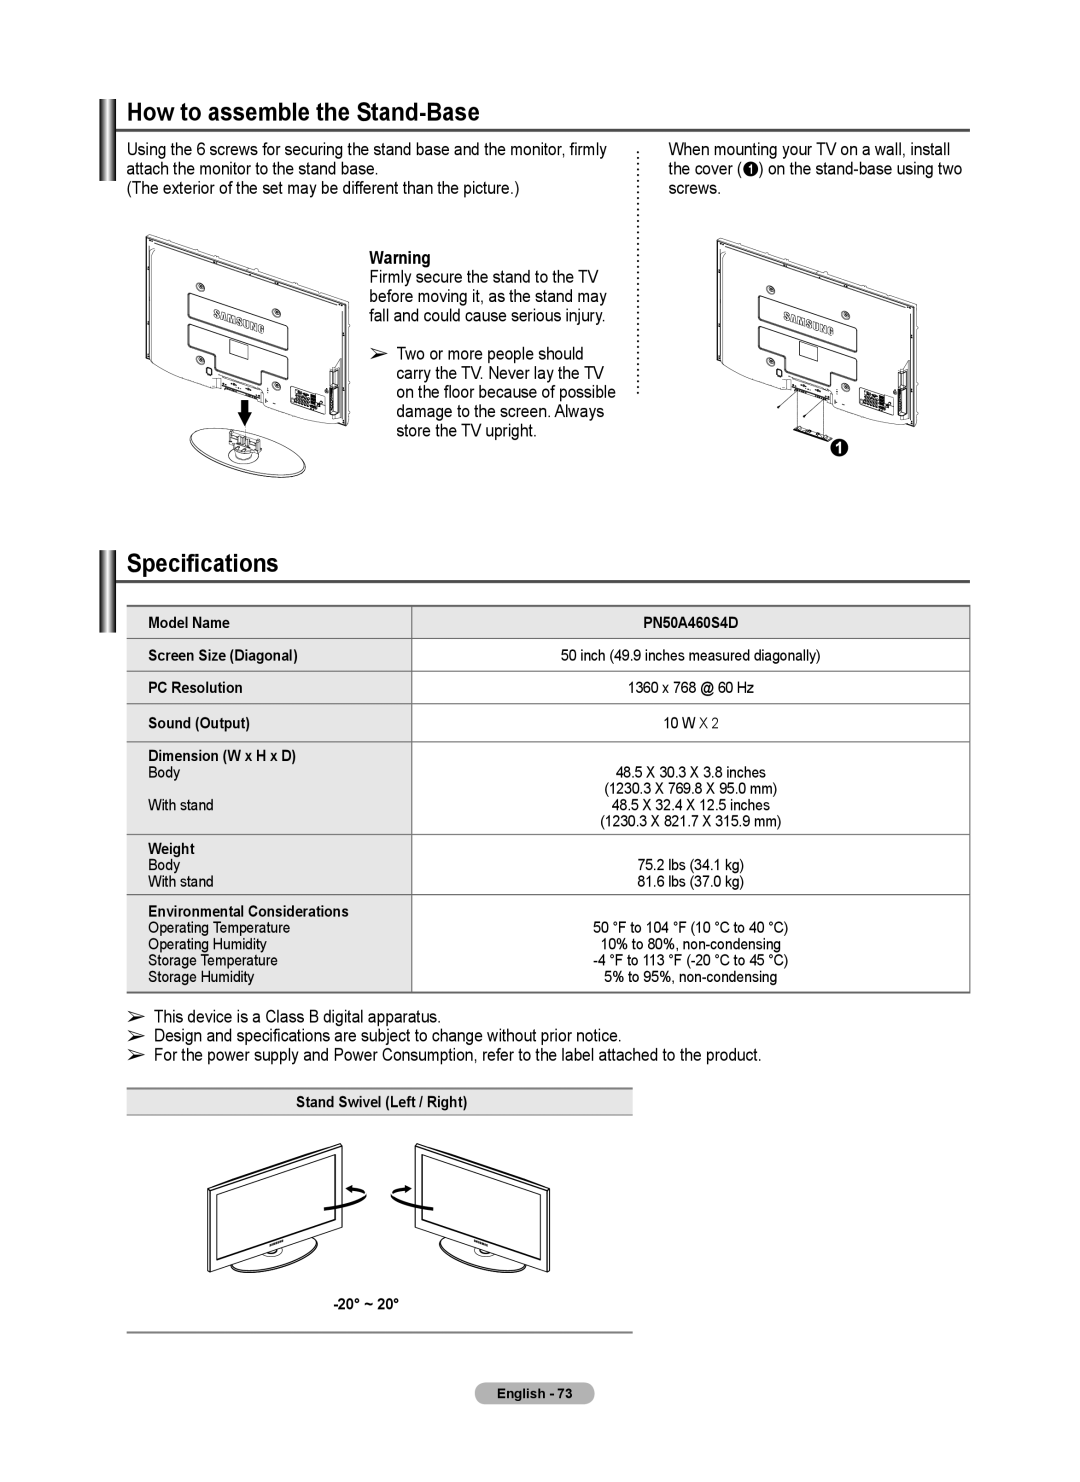 Samsung 460 user manual How to assemble the Stand-Base, Specifications 